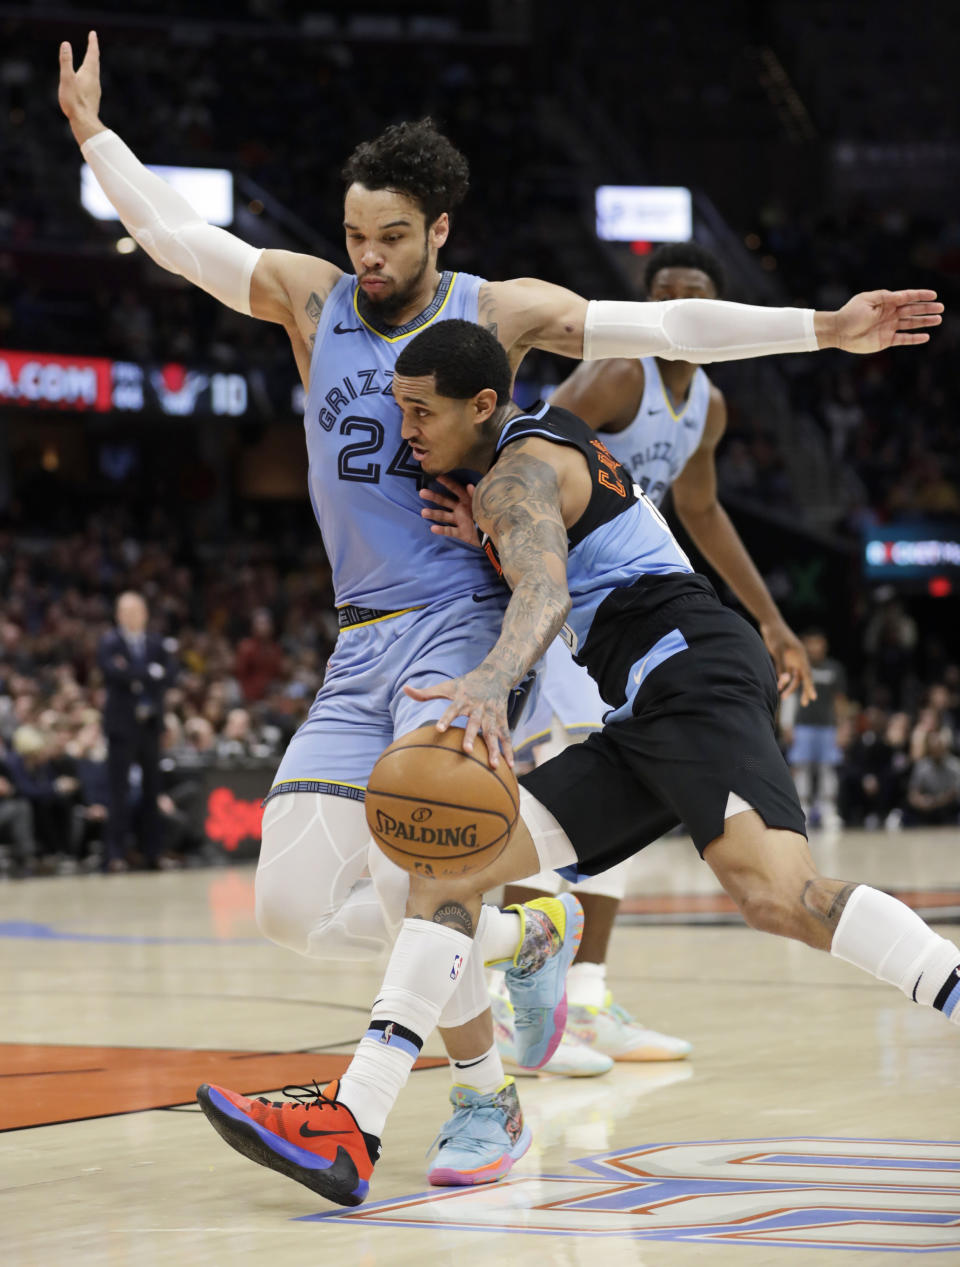 Cleveland Cavaliers' Jordan Clarkson, front right, drives past Memphis Grizzlies' Dillon Brooks (24) in the second half of an NBA basketball game, Friday, Dec. 20, 2019, in Cleveland. (AP Photo/Tony Dejak)